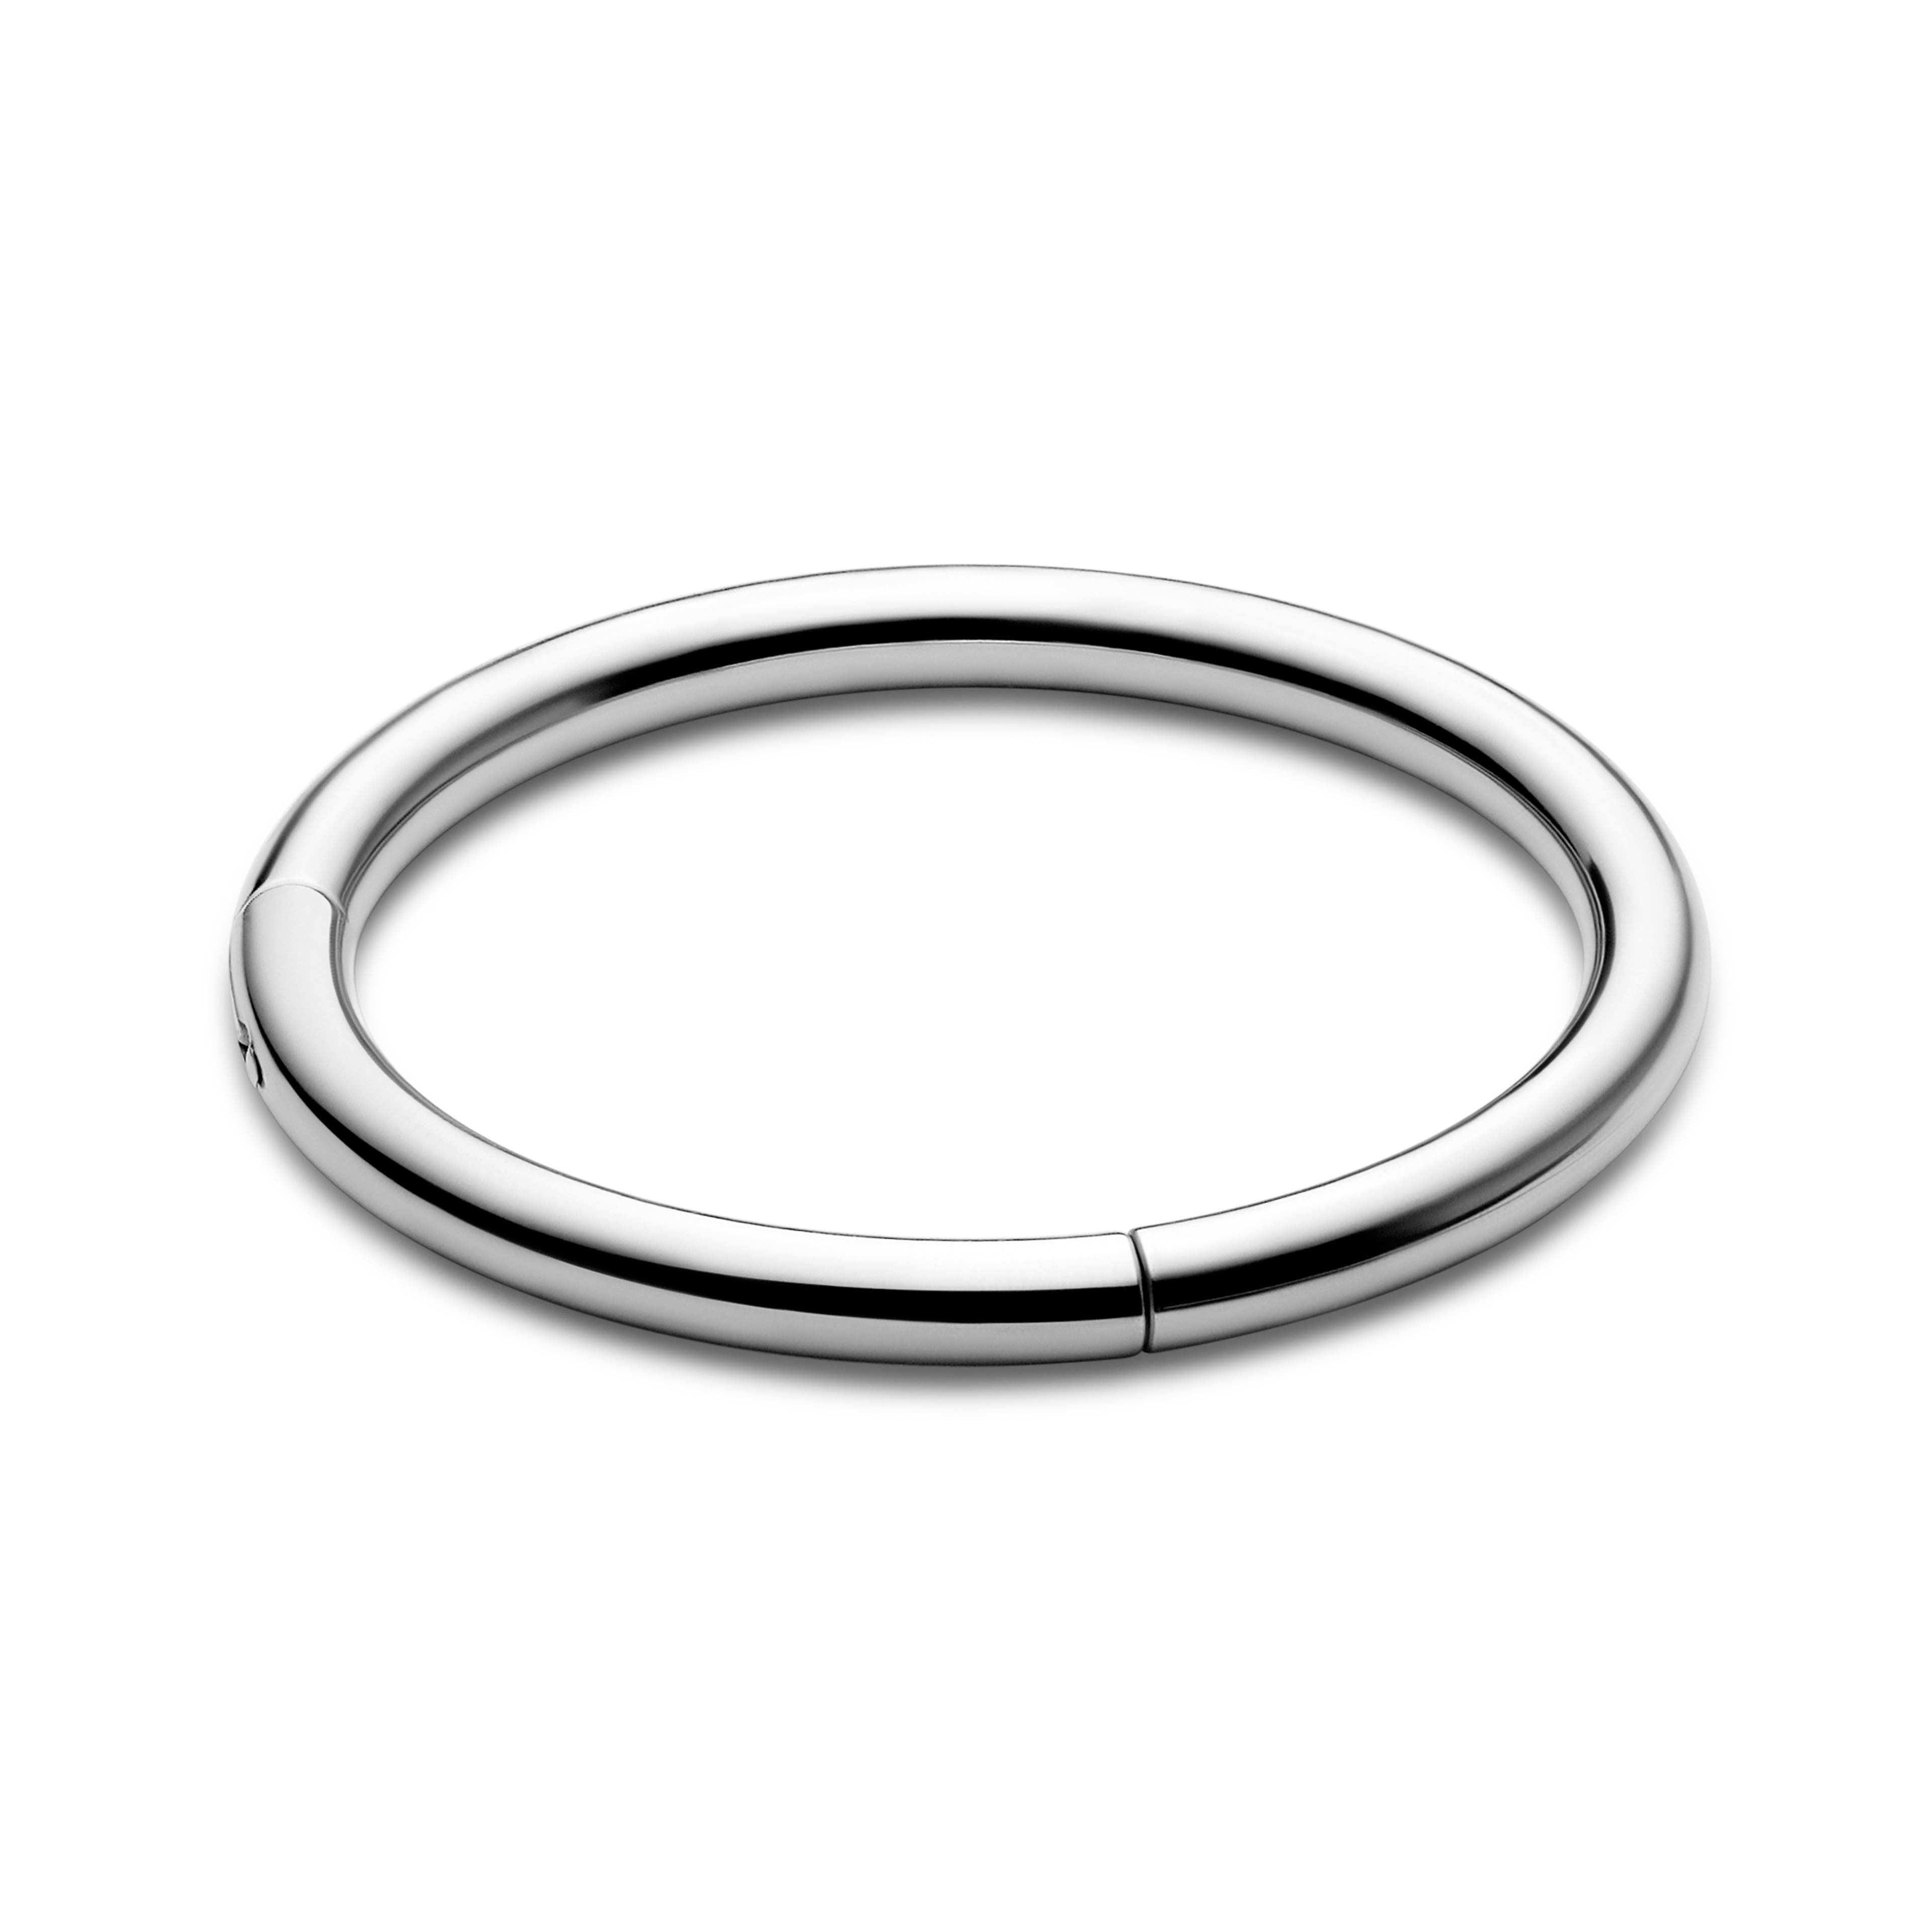 1/3" (8 mm) Silver-tone Surgical Steel Piercing Ring